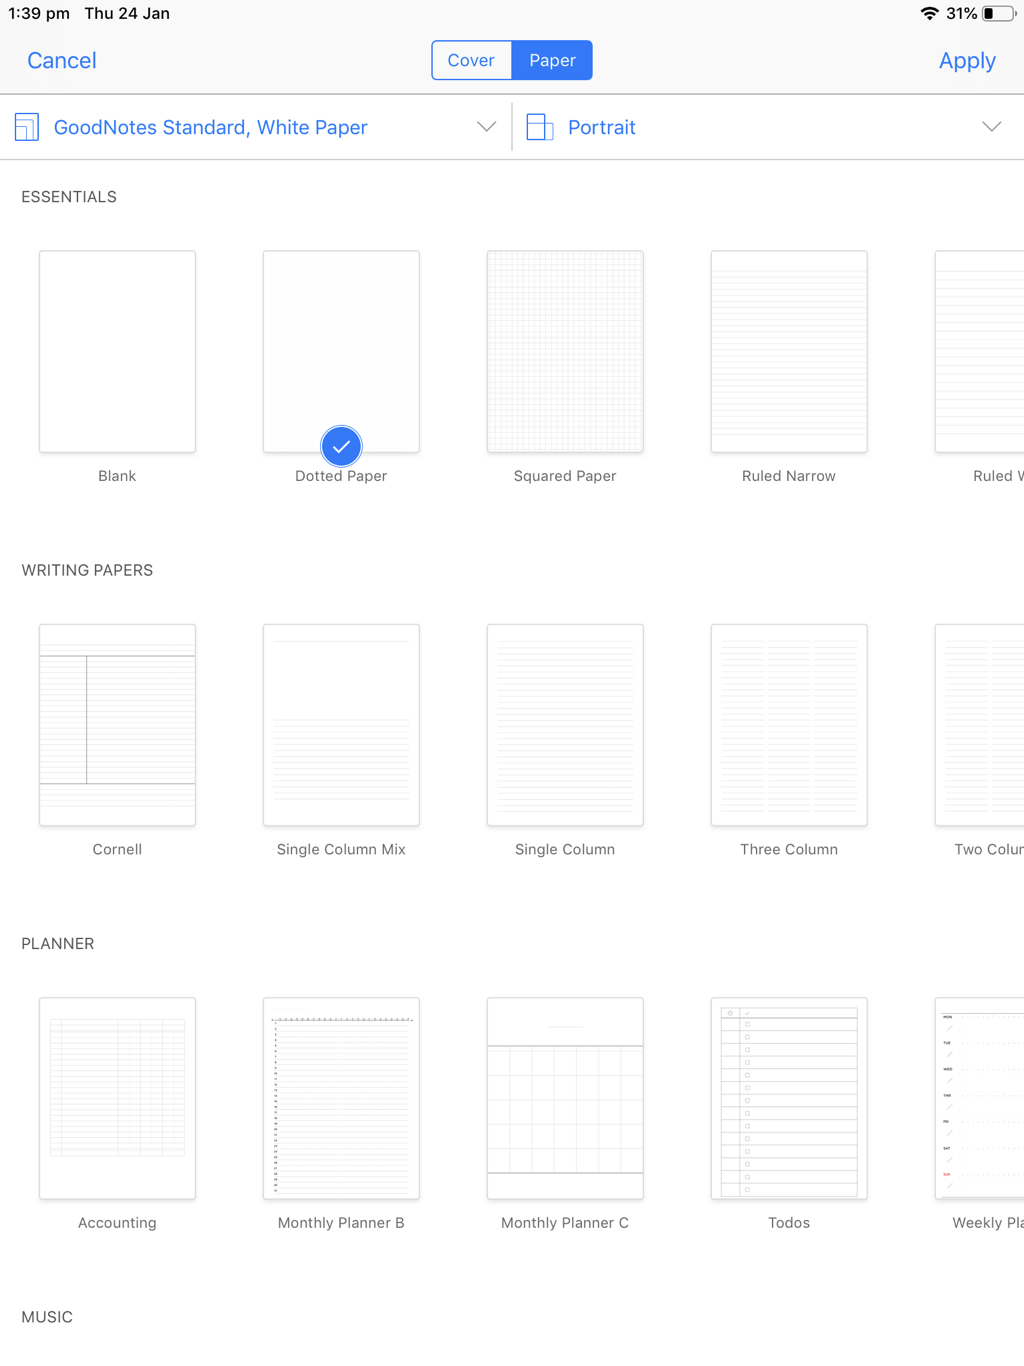 goodnotes paper templates